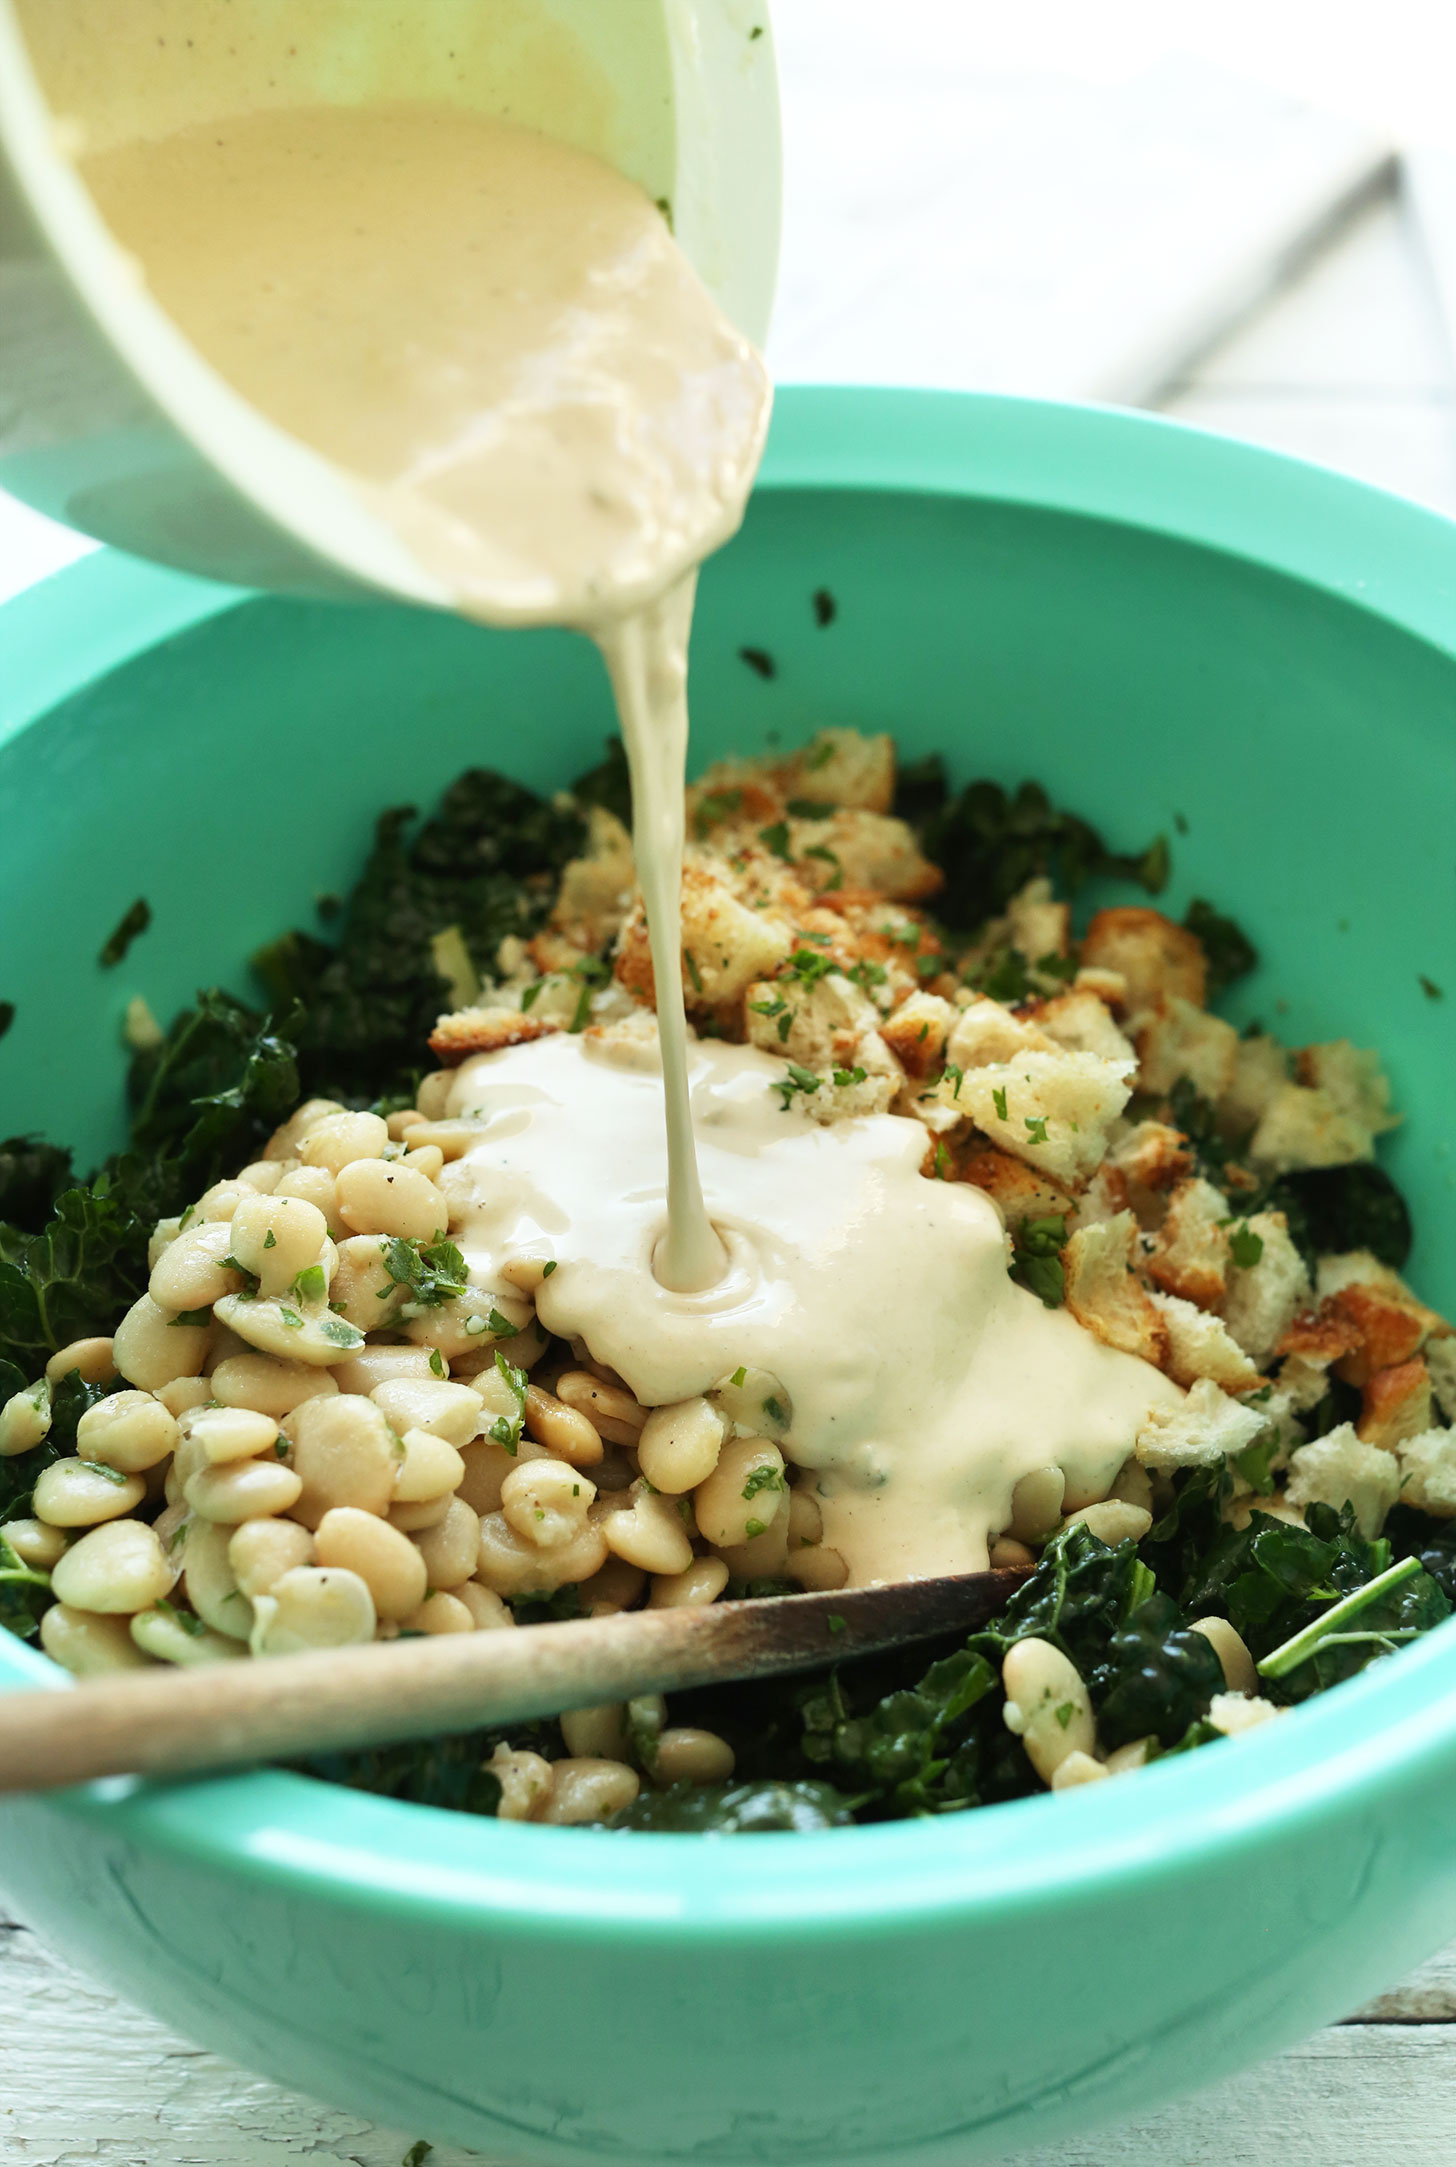 Pouring Garlic-Tahini Dressing over our Lemony Garlic Kale Salad with Butter Beans